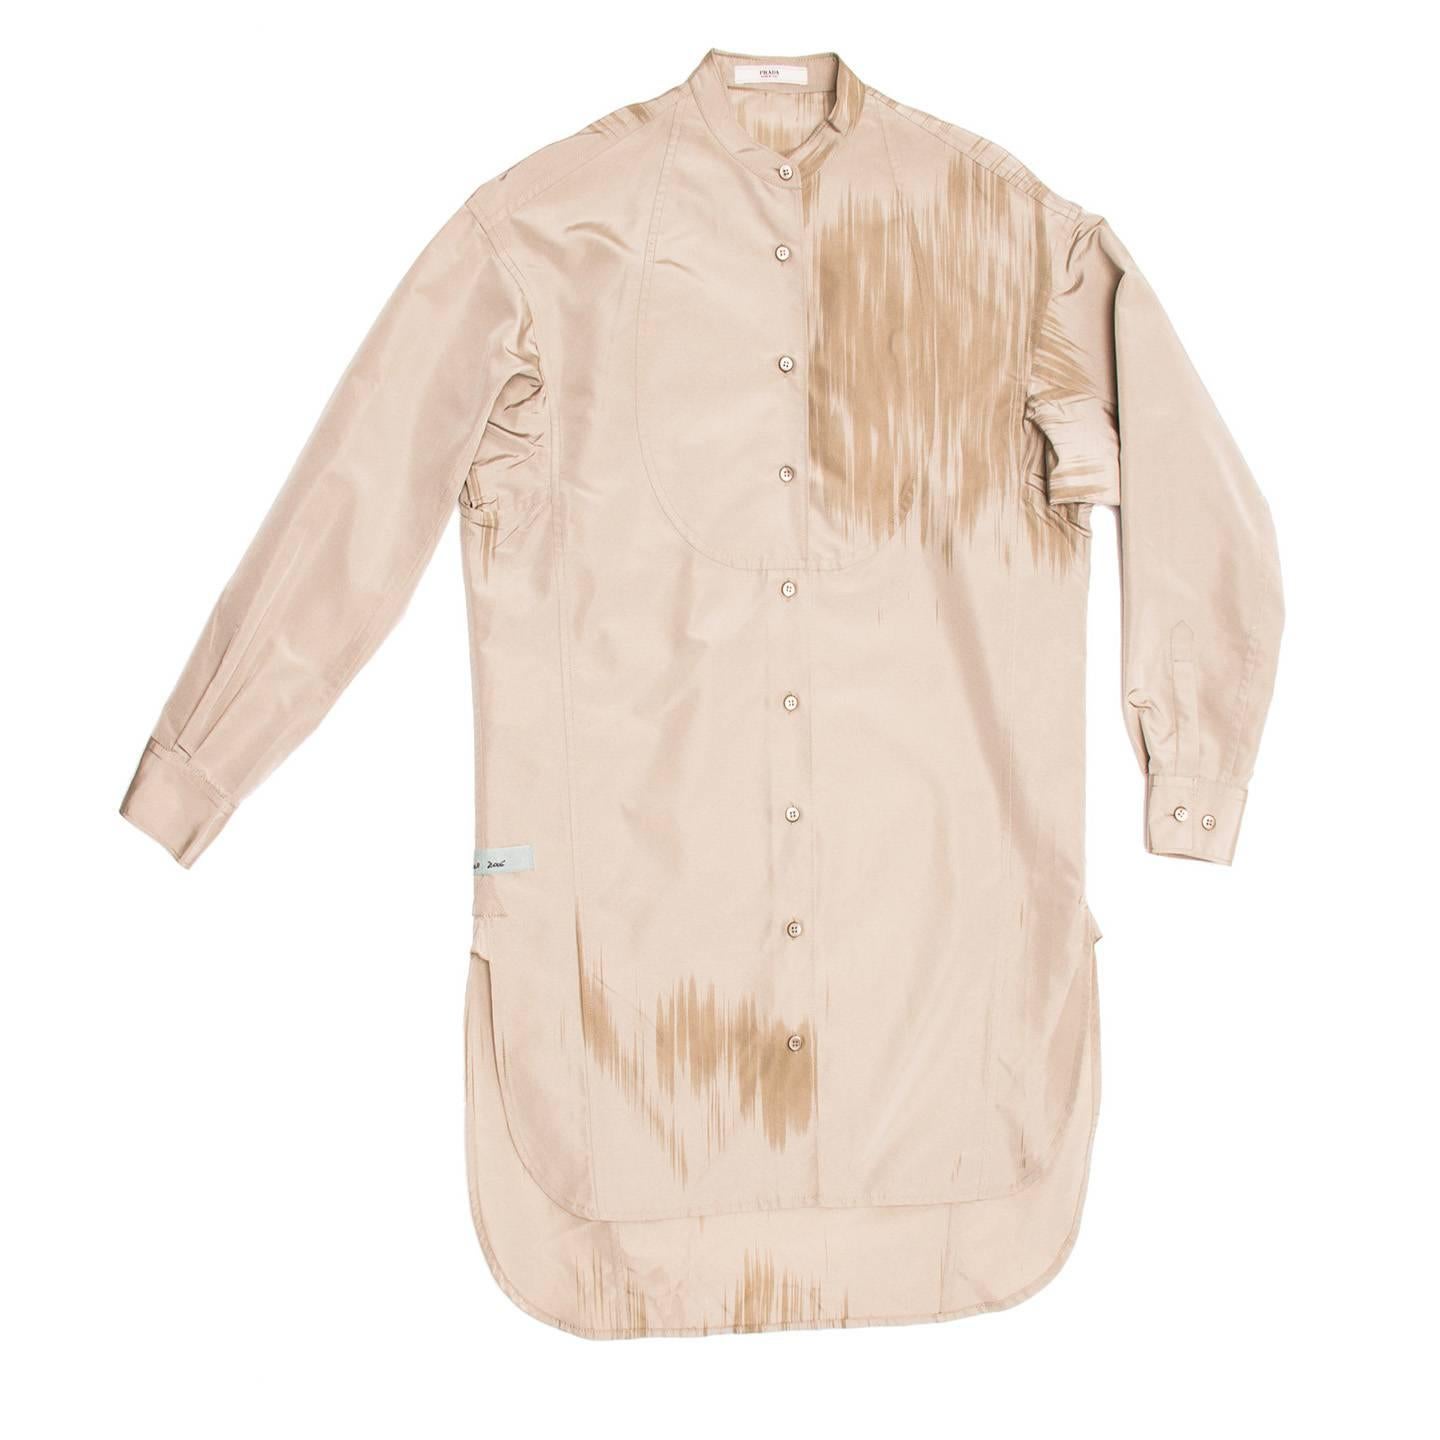 Taupe silk/polyester tunic style comfortable shirtdress with Nehru collar, bib front and paint brush detailing at front and back. The hem is round with detailed vents at side seams and the back is longer than the front. Made for Art Basel.

Size 